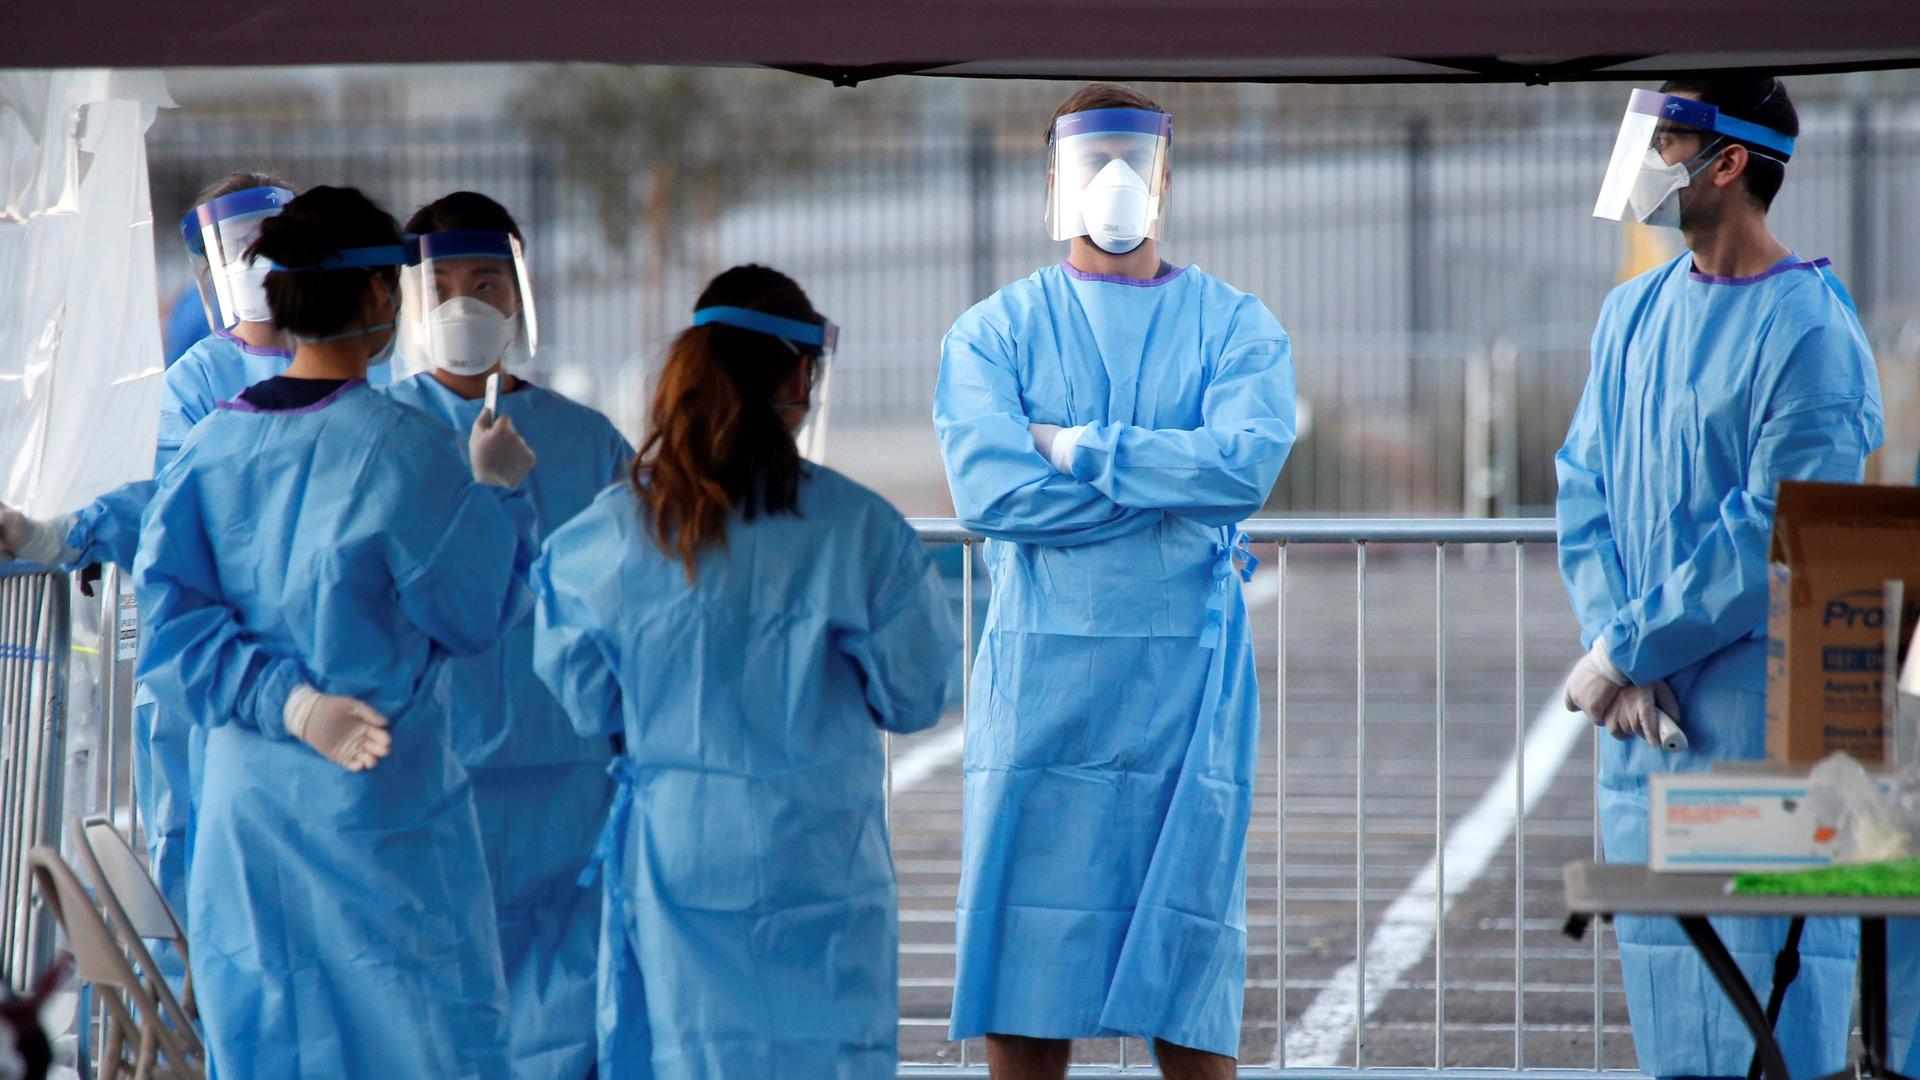 Medical students and physician assistants from Touro University Nevada wait to screen people in a temporary parking lot shelter at Cashman Center, with spaces marked for social distancing to help slow the spread of the coronavirus disease (COVID-19) in La